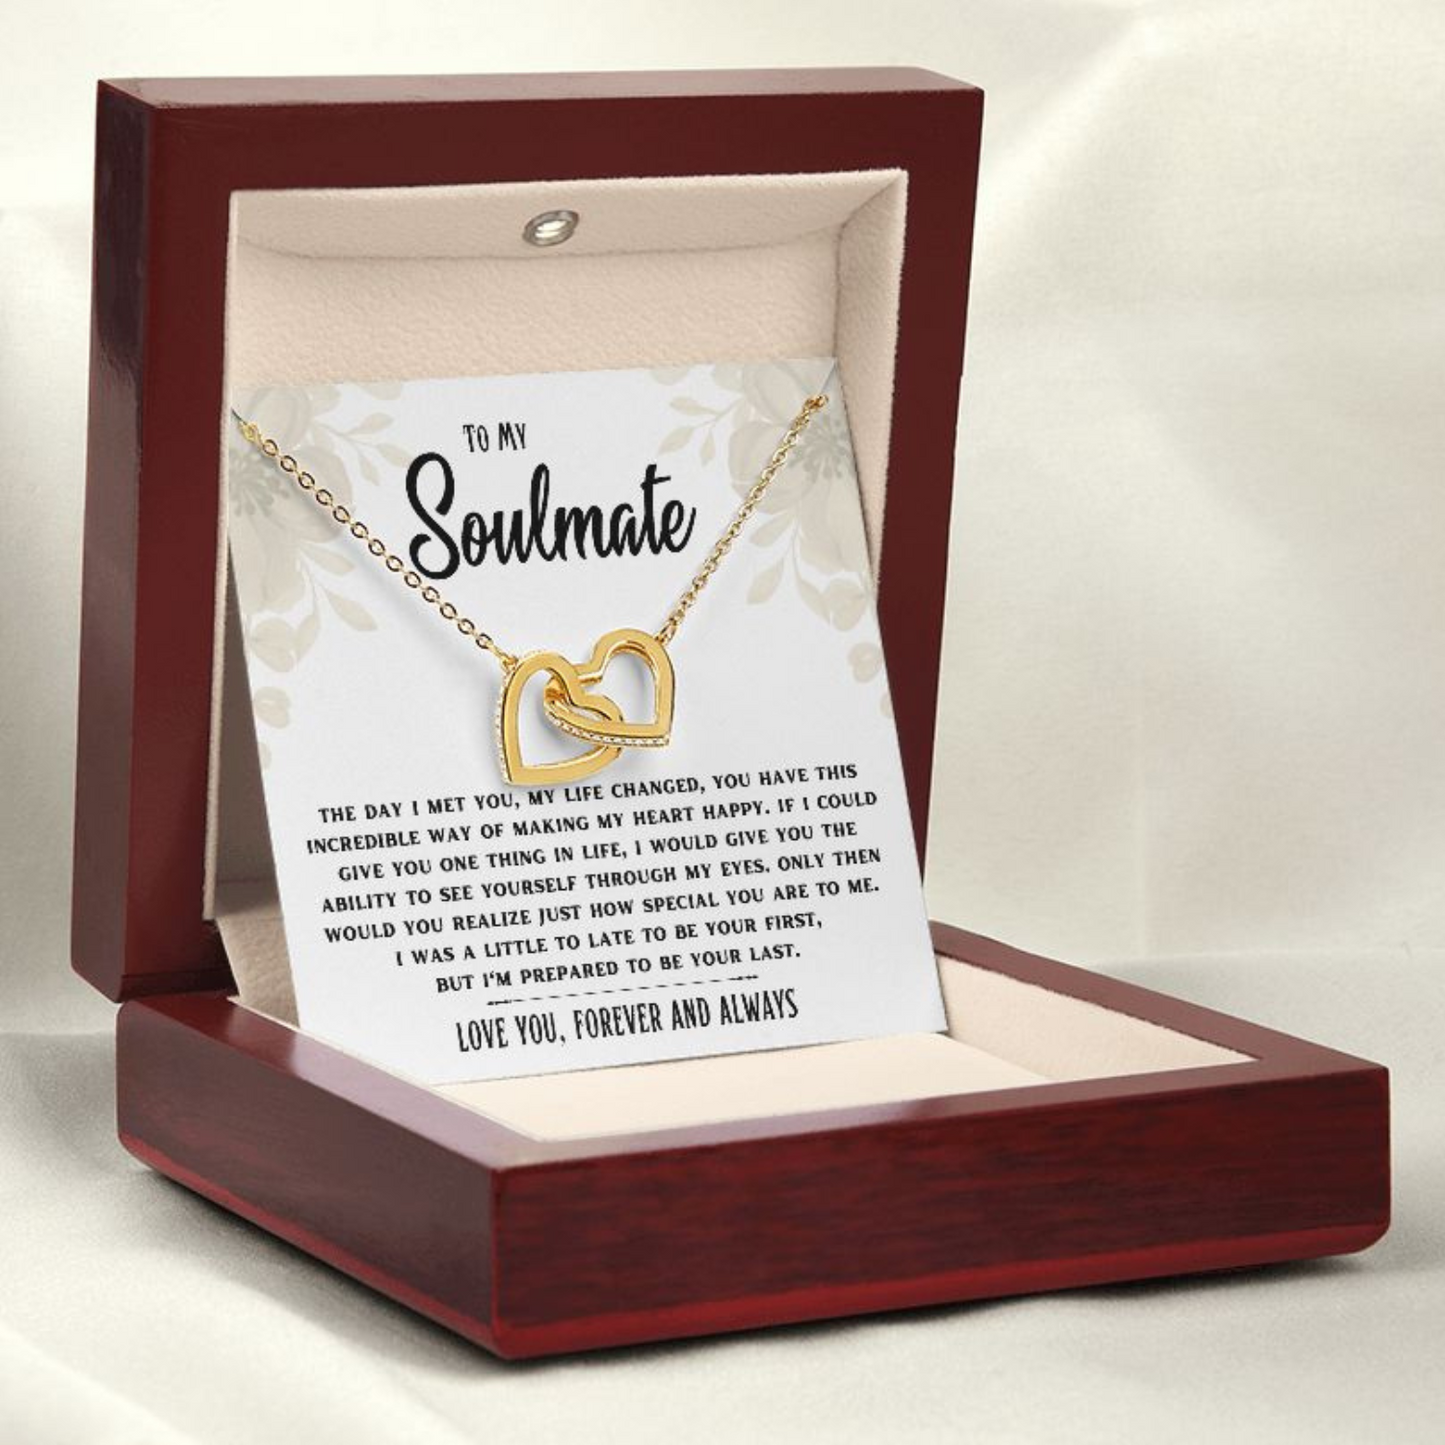 Soulmate-How special you are to me-Interlocking Hearts Necklace